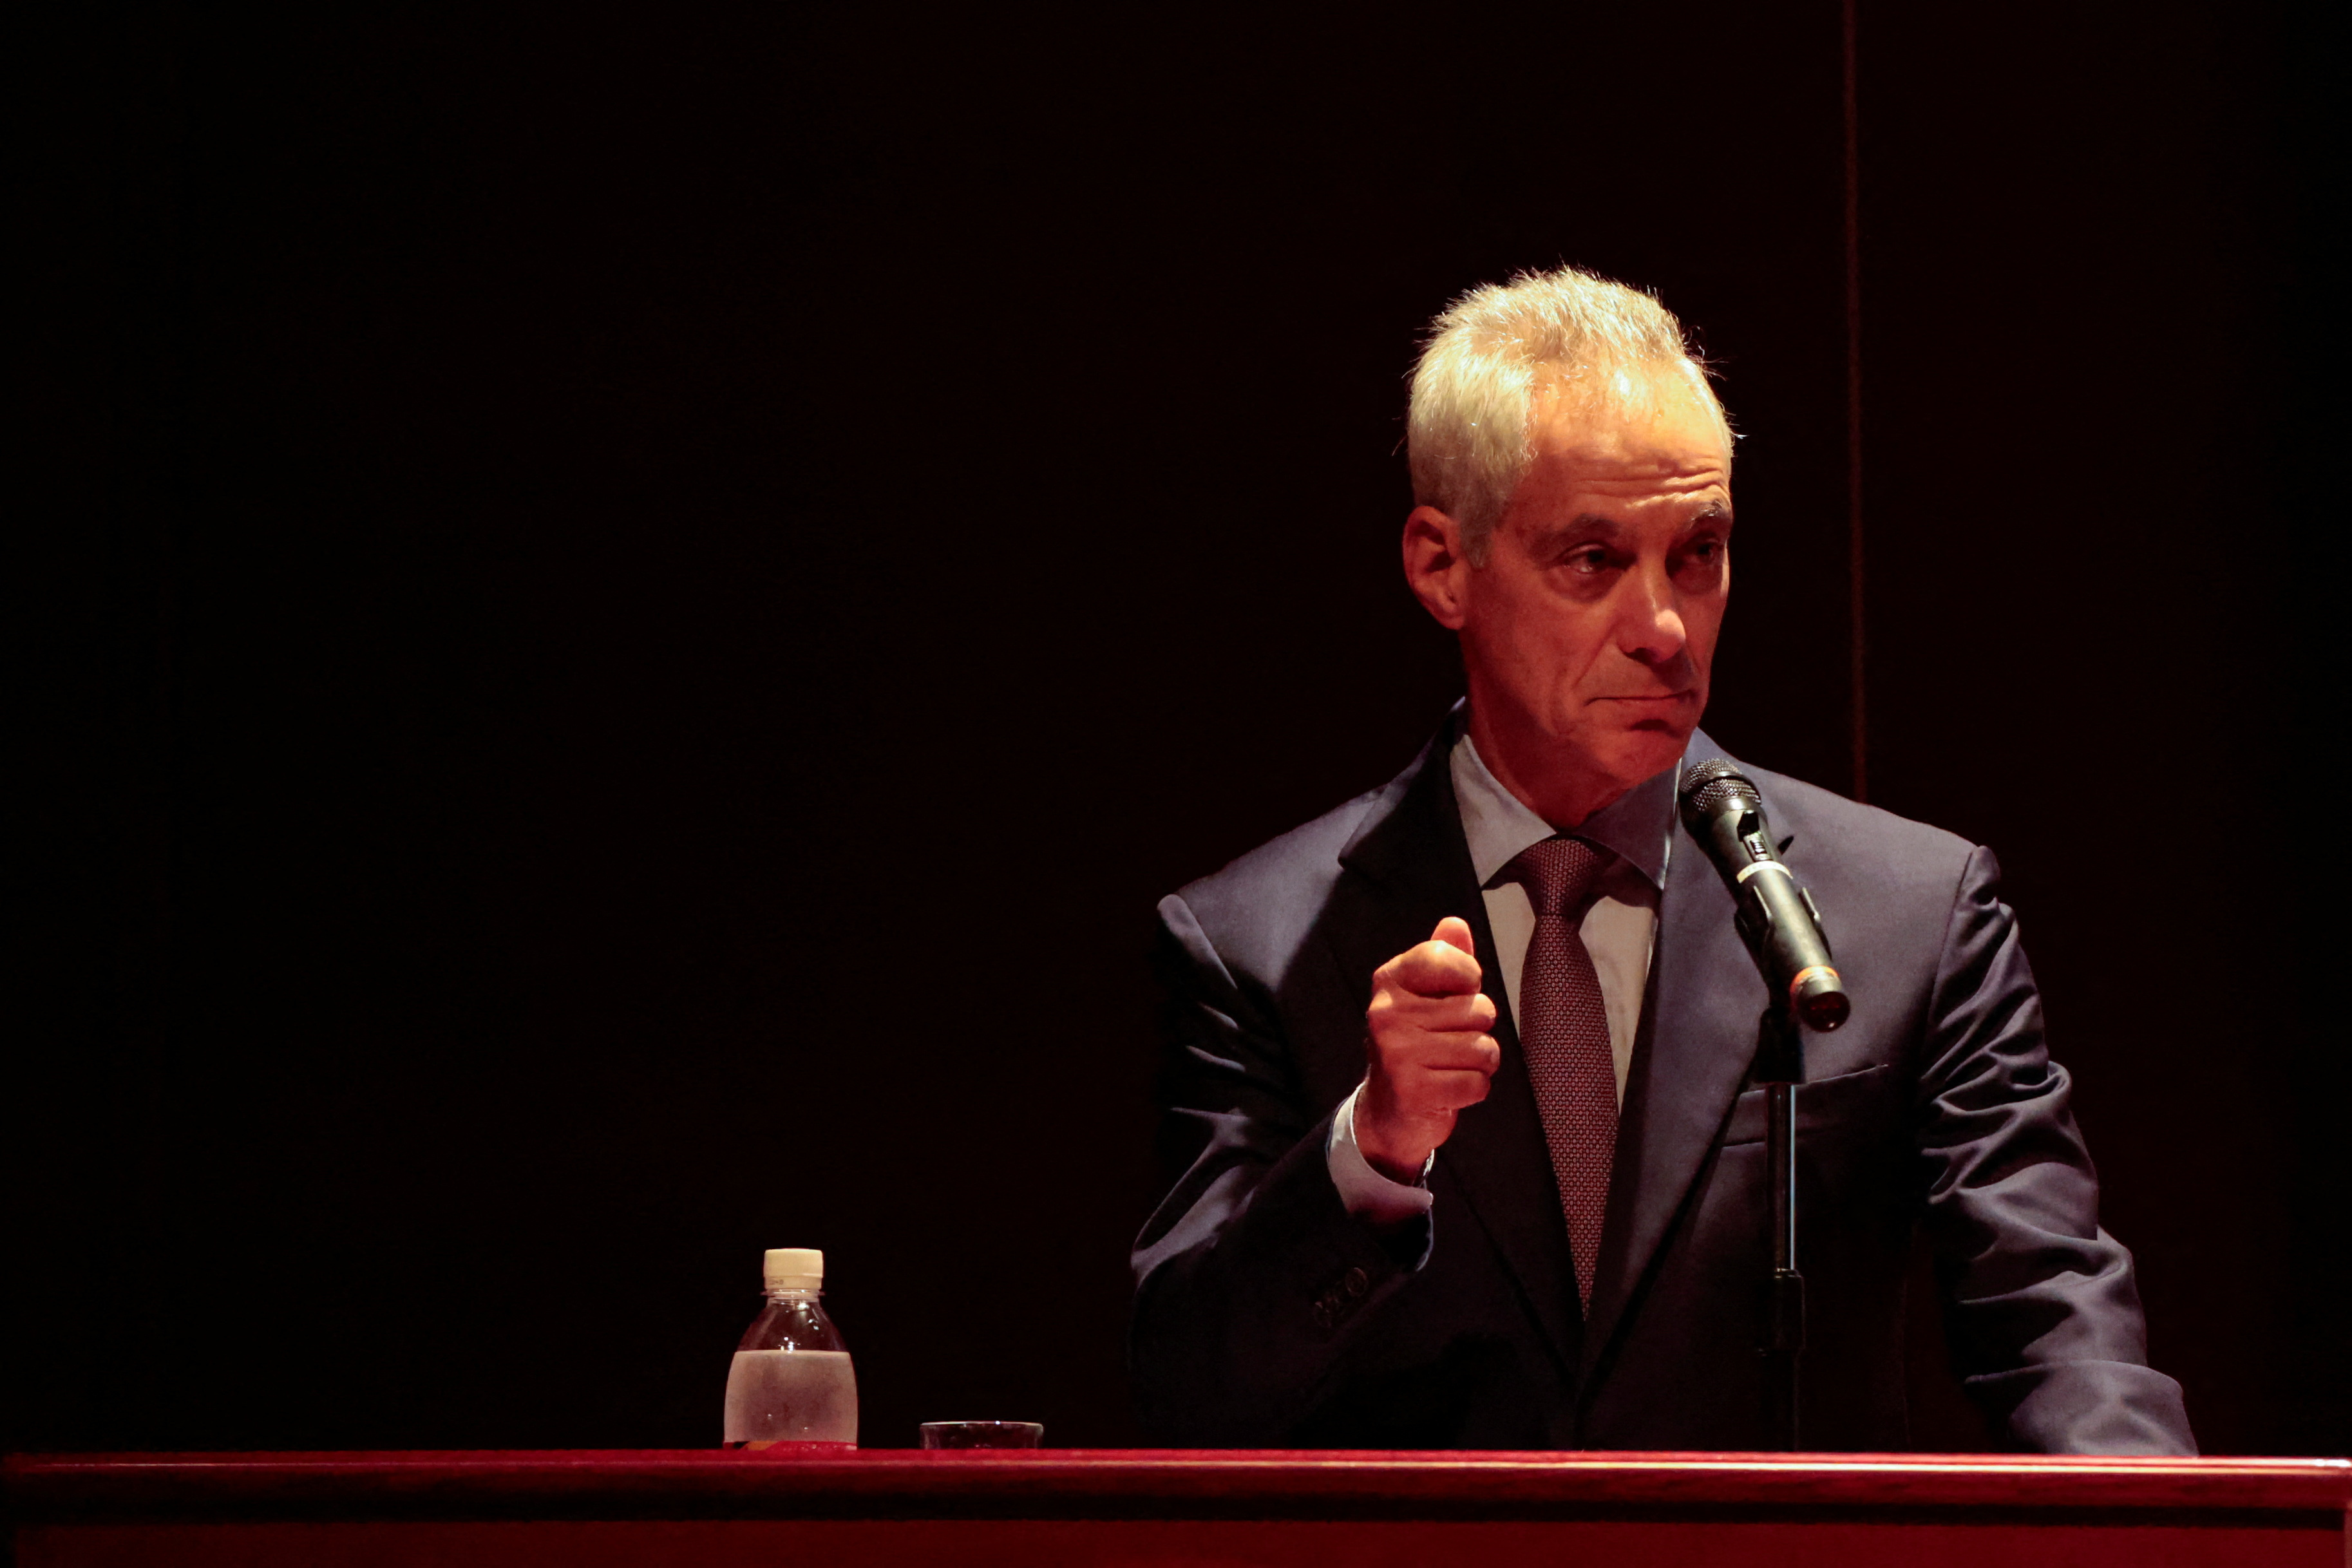 U.S. Ambassador to Japan Rahm Emanuel gives a speech at the National Graduate Institute for Policy Studies in Tokyo